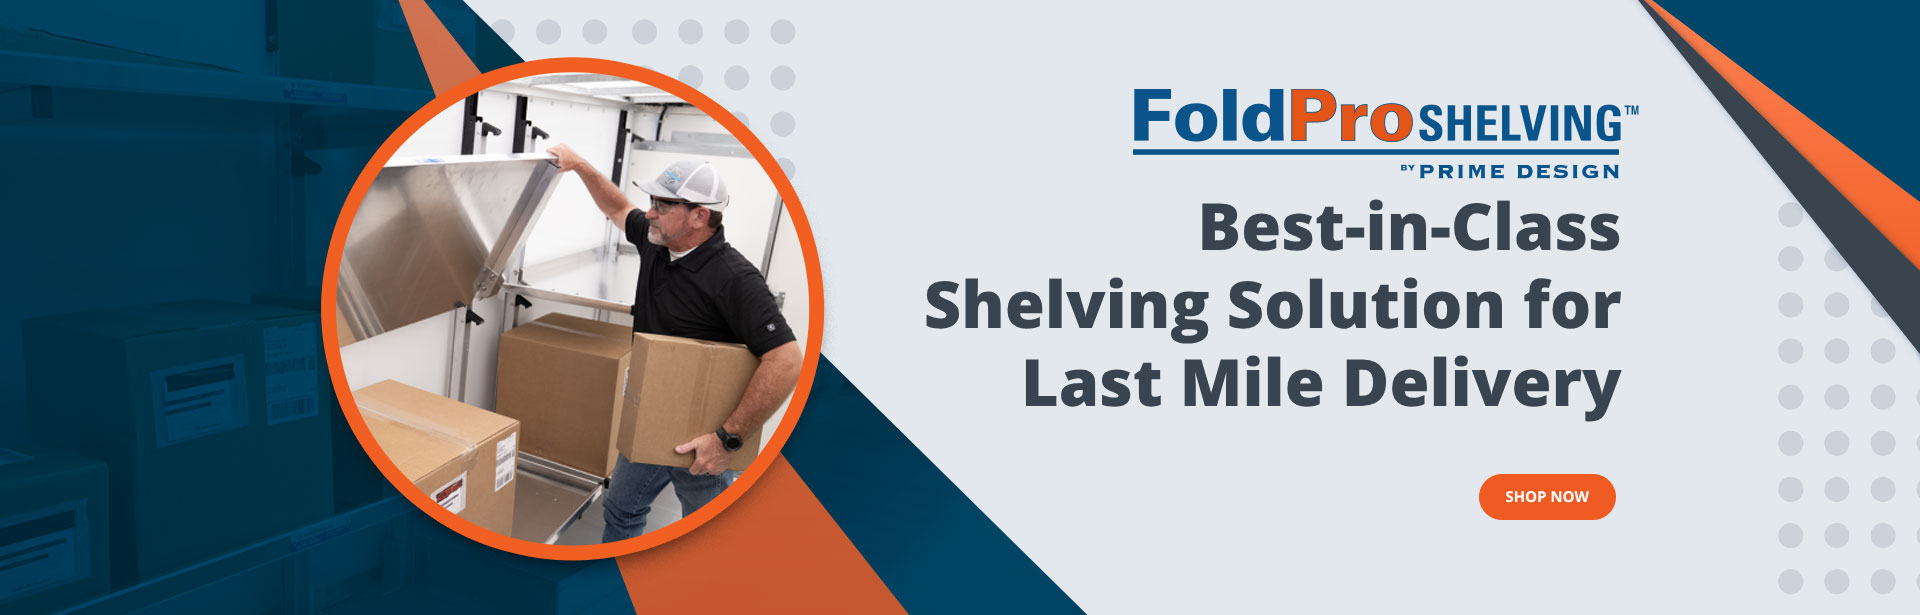 FoldPro Shelving For Last Mile Delivery